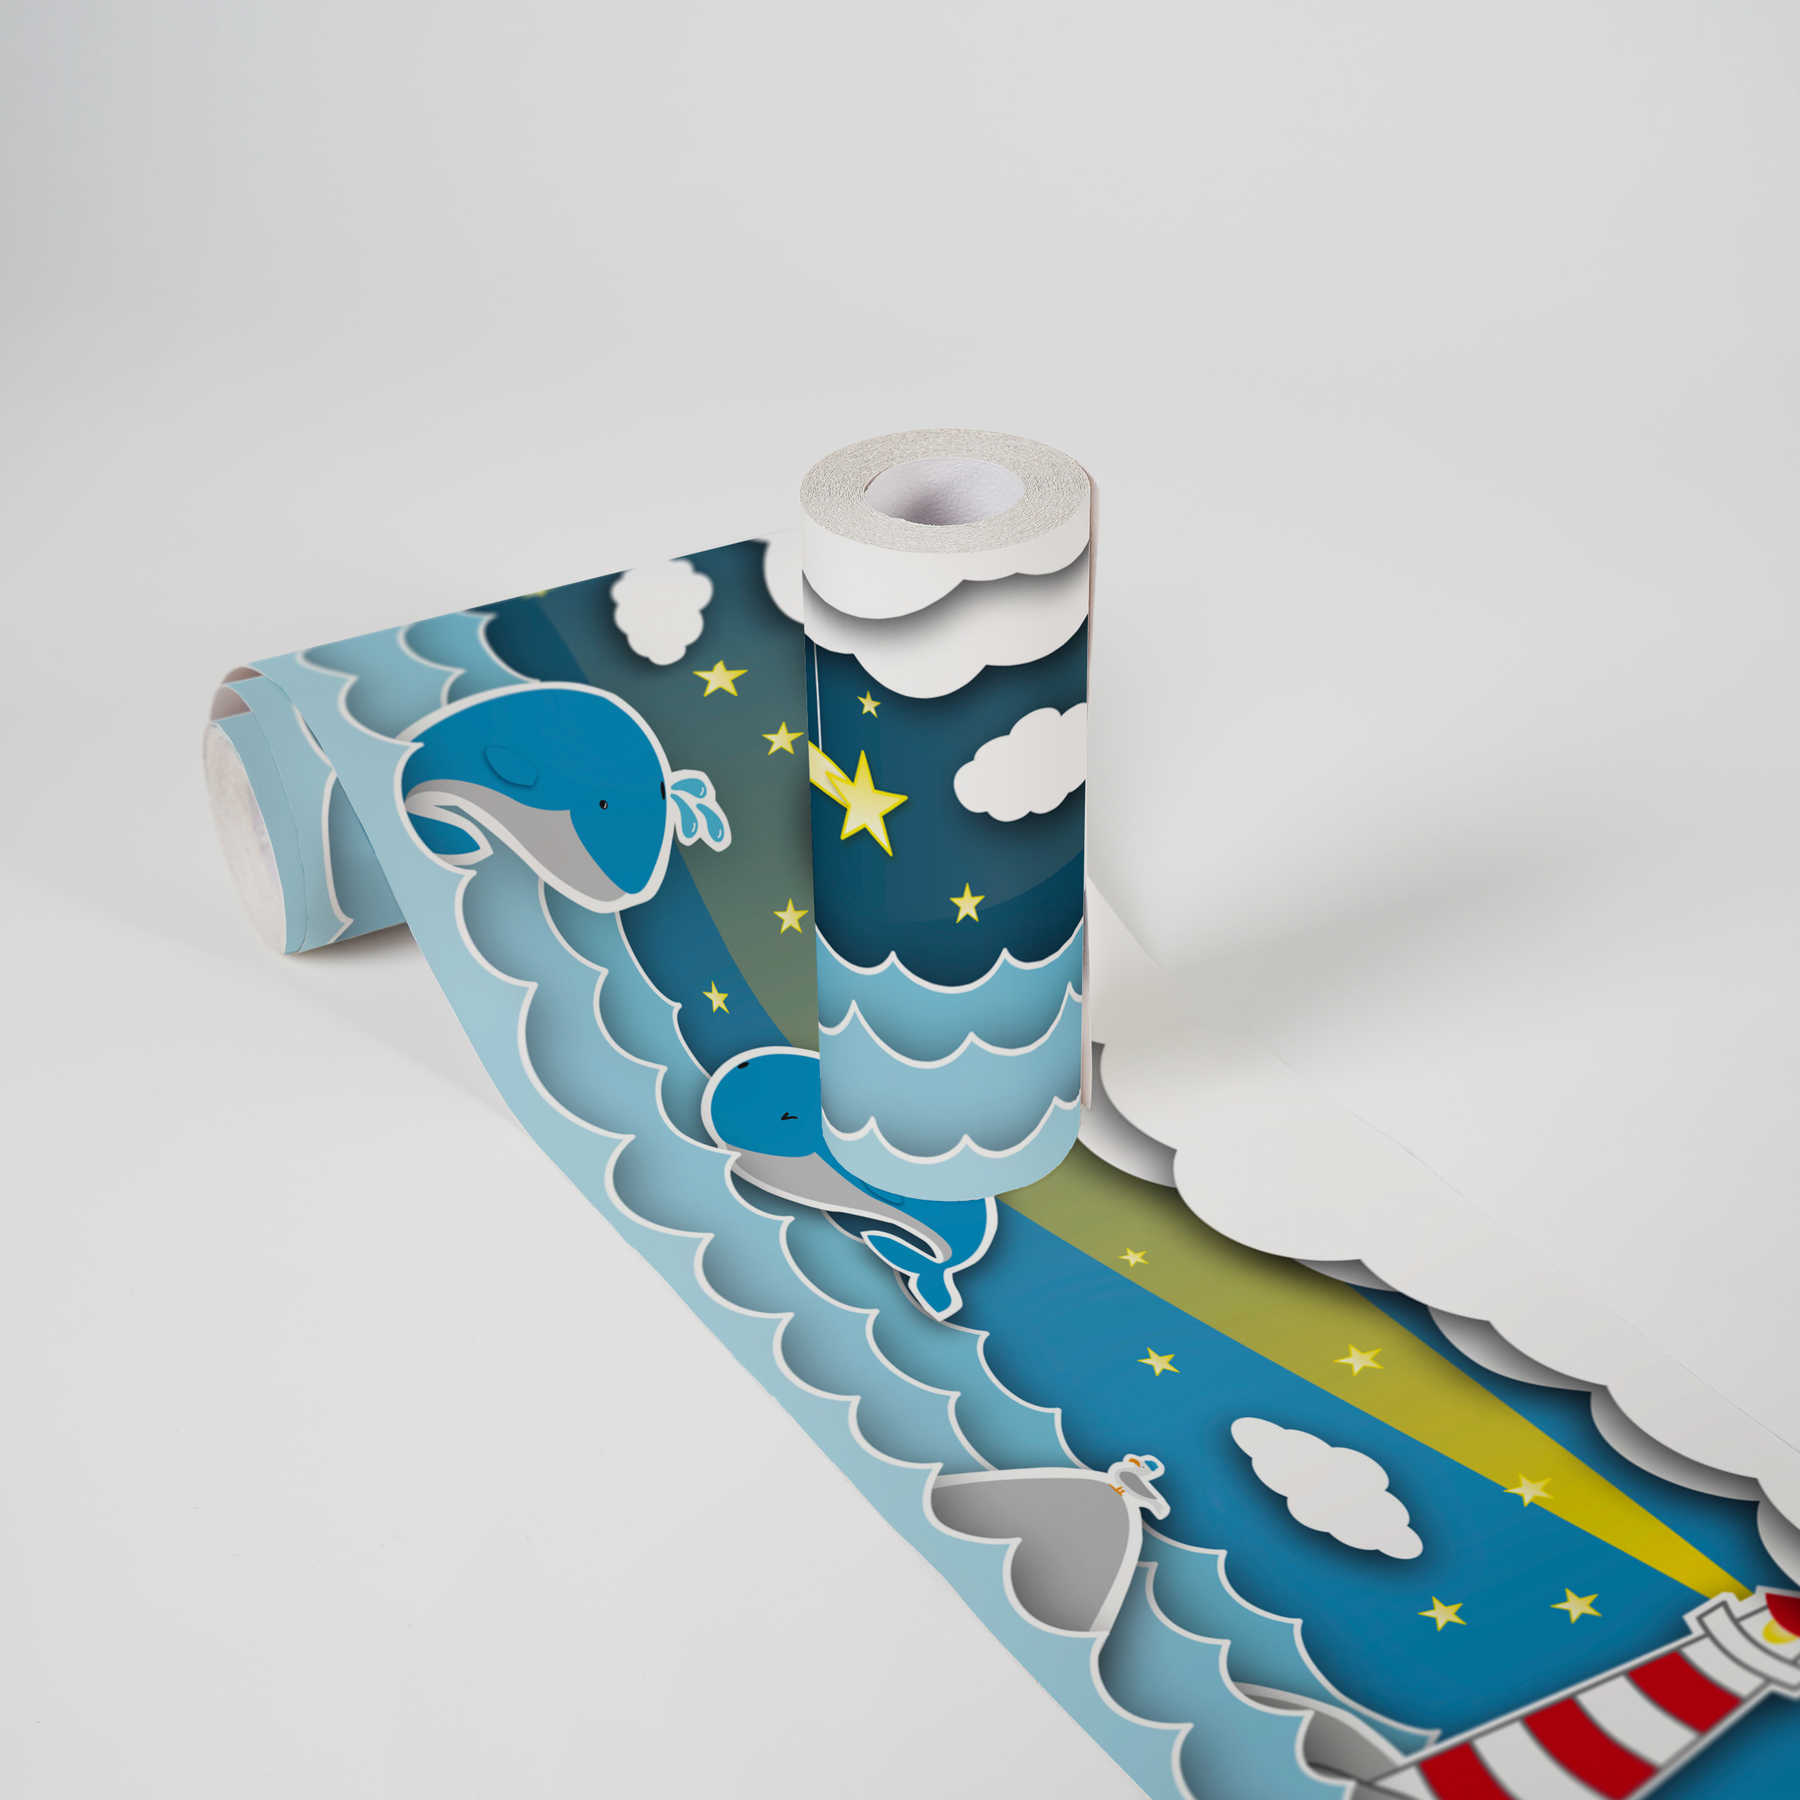             Self-adhesive border "Water theater" lighthouse - blue, red, yellow
        